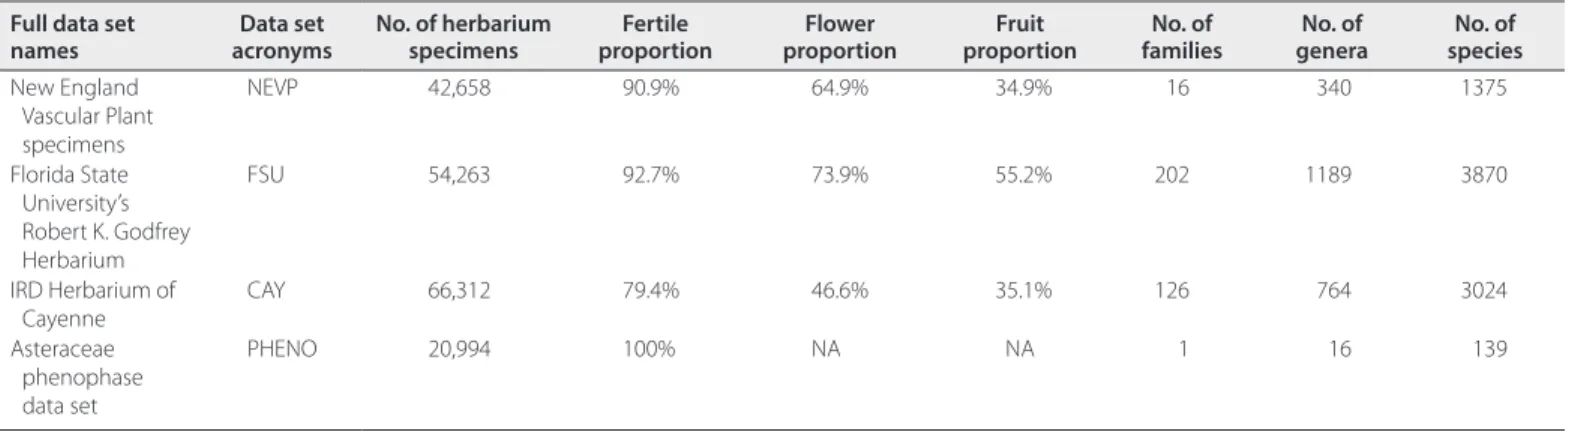 TABLE 1.  Description of data sets used on EXP1- Fertility, EXP2- Fl.Fr, and EXP3- Pheno